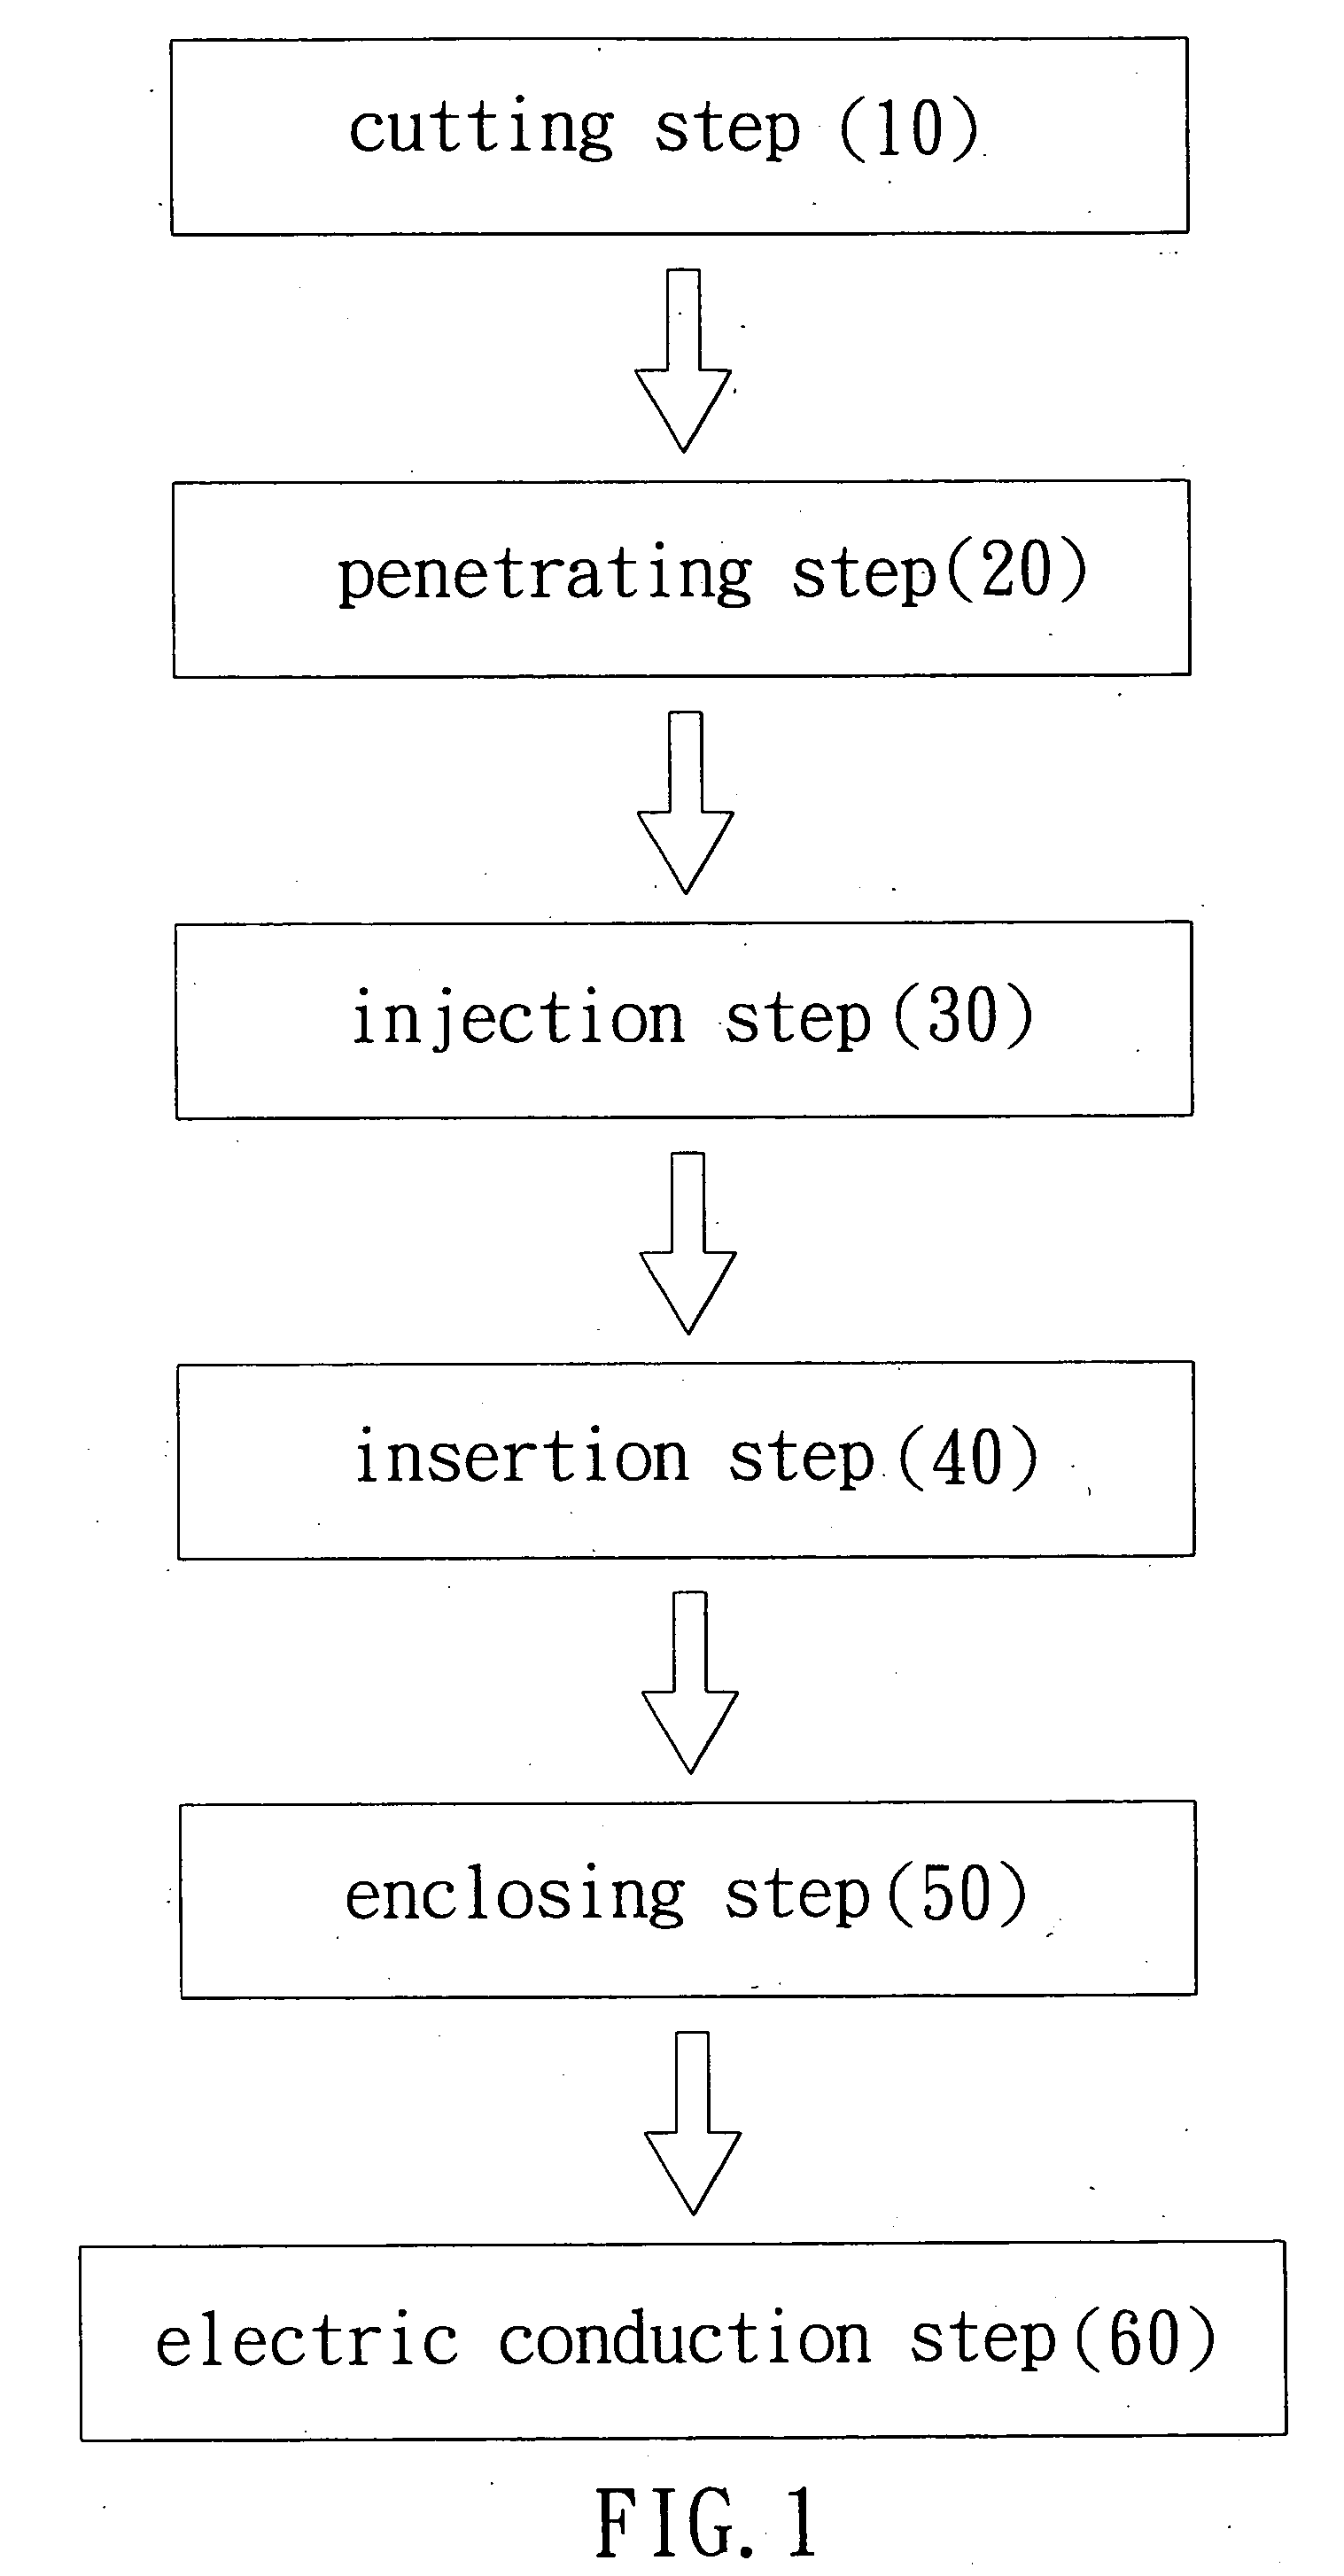 Method for plant gene transfering by electrical shock and ovary injection